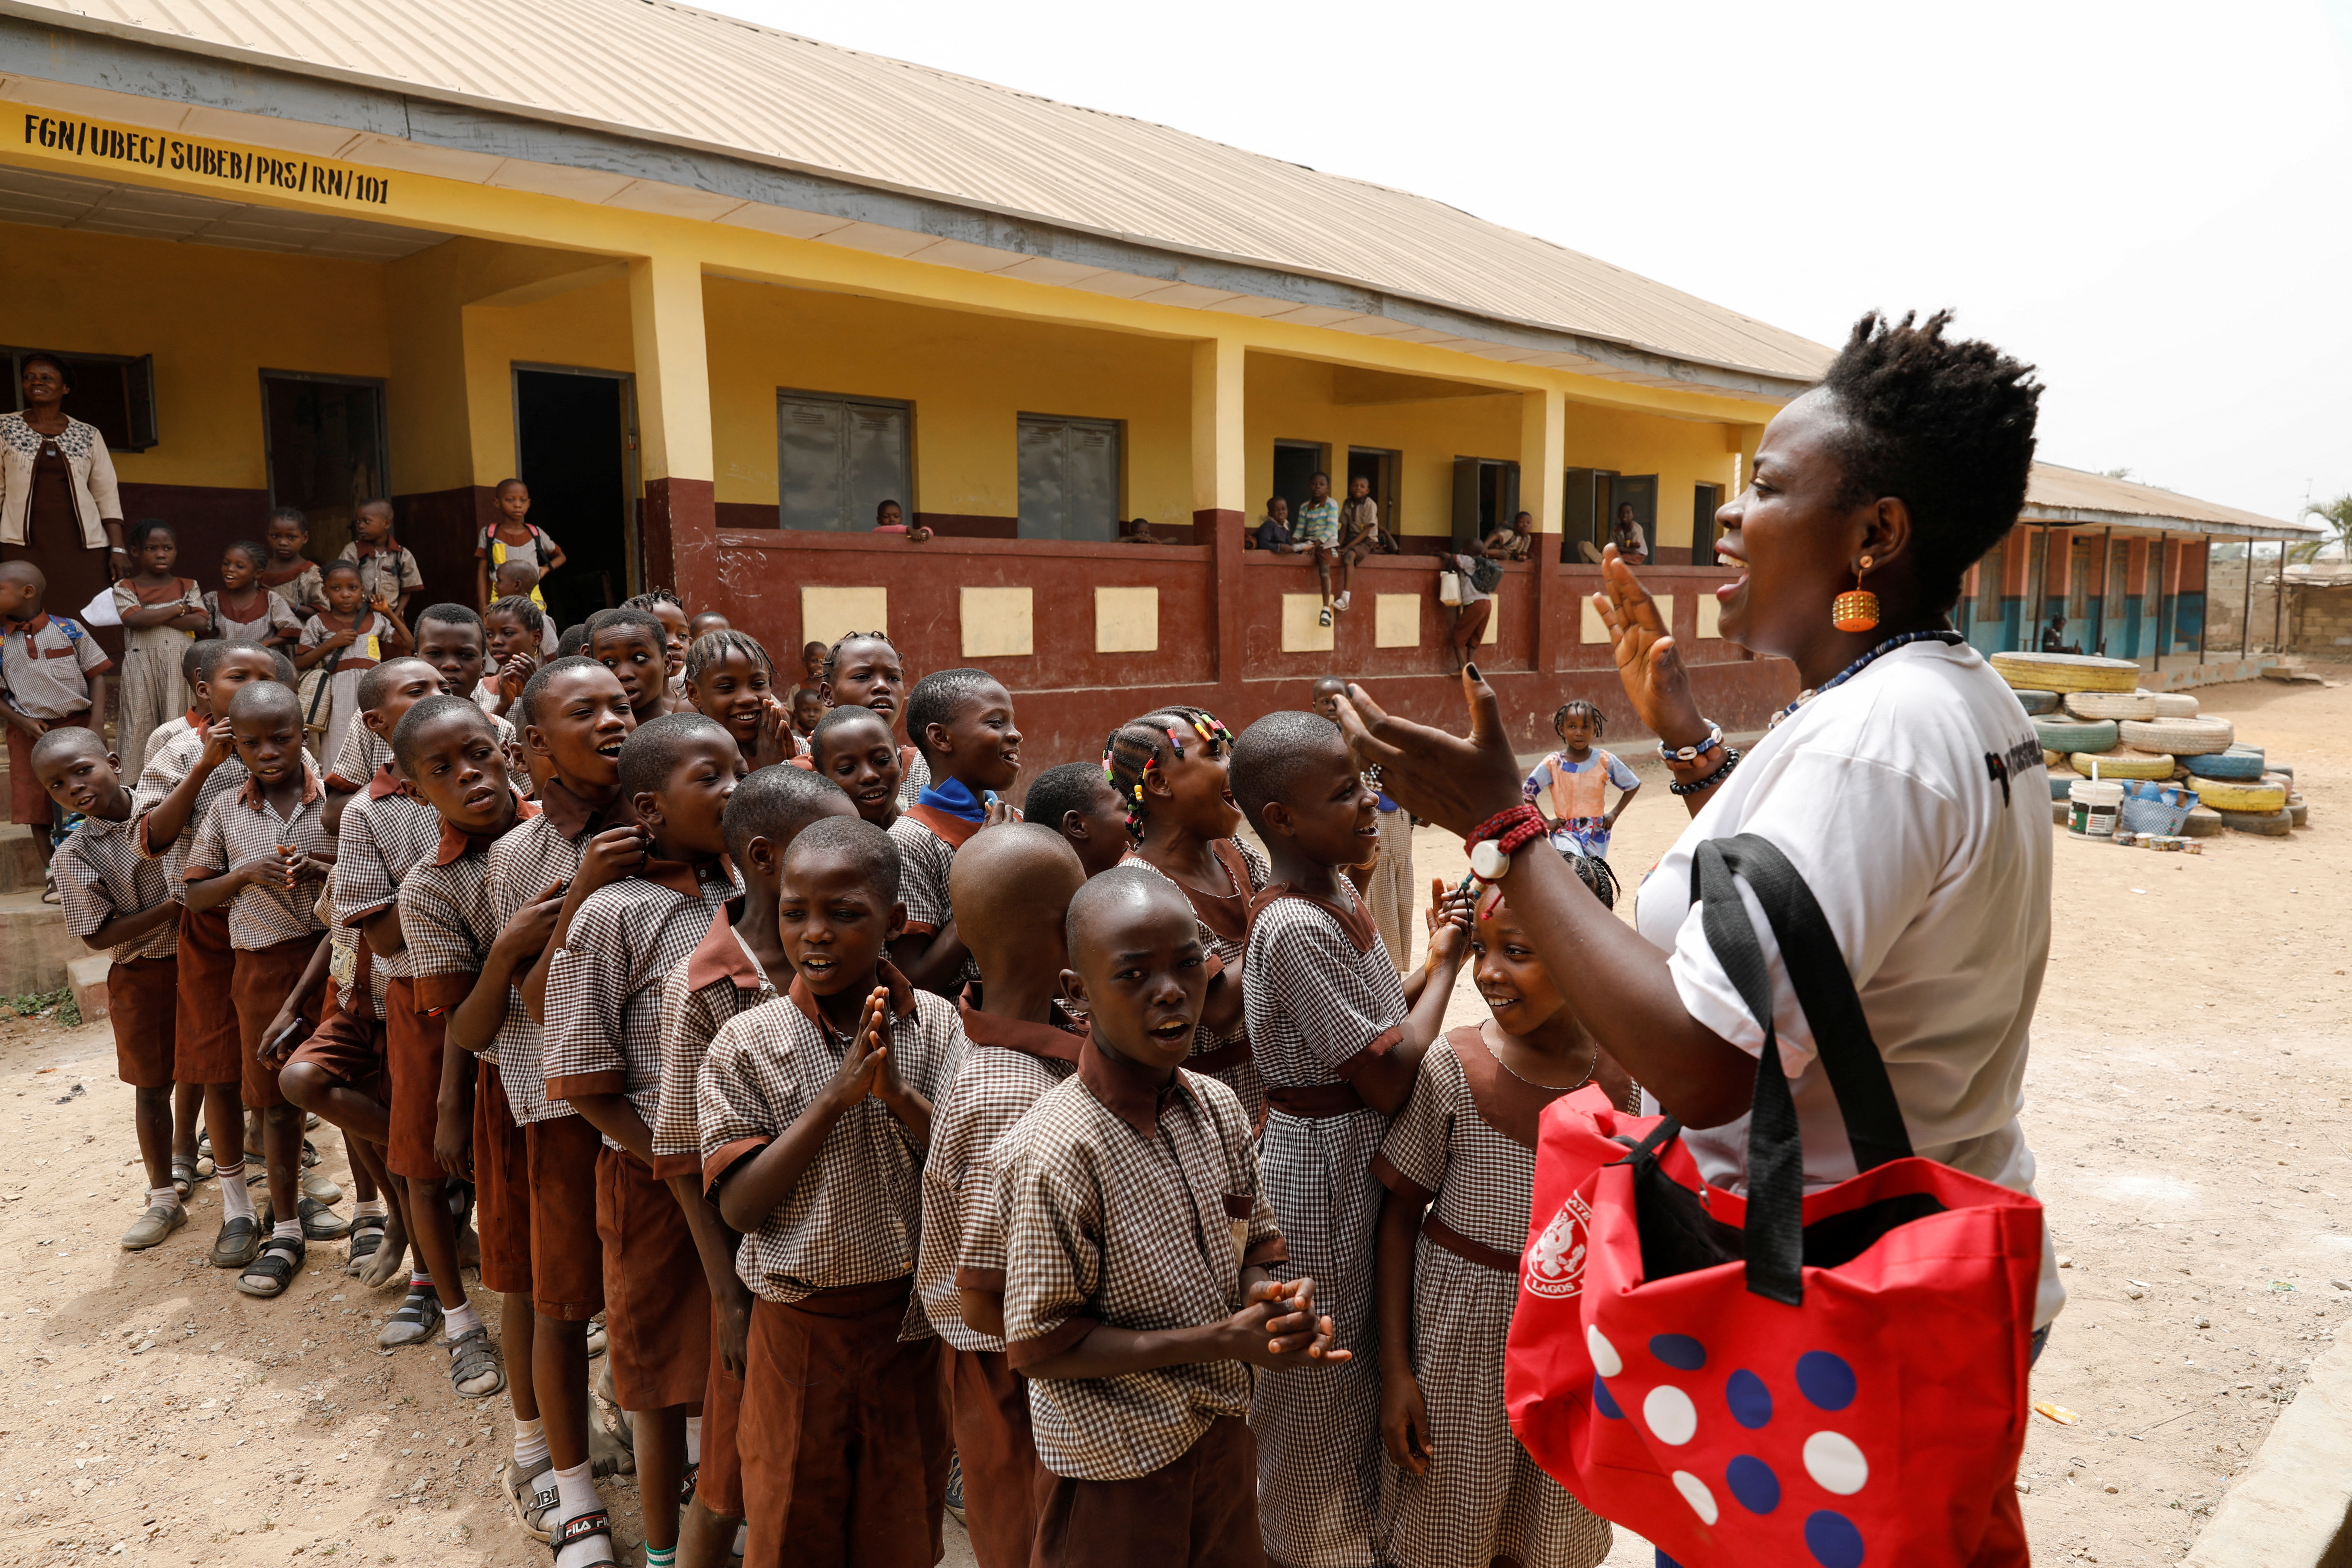 Waste Museum founder Olowookere speaks to children at a school, in Ibadan